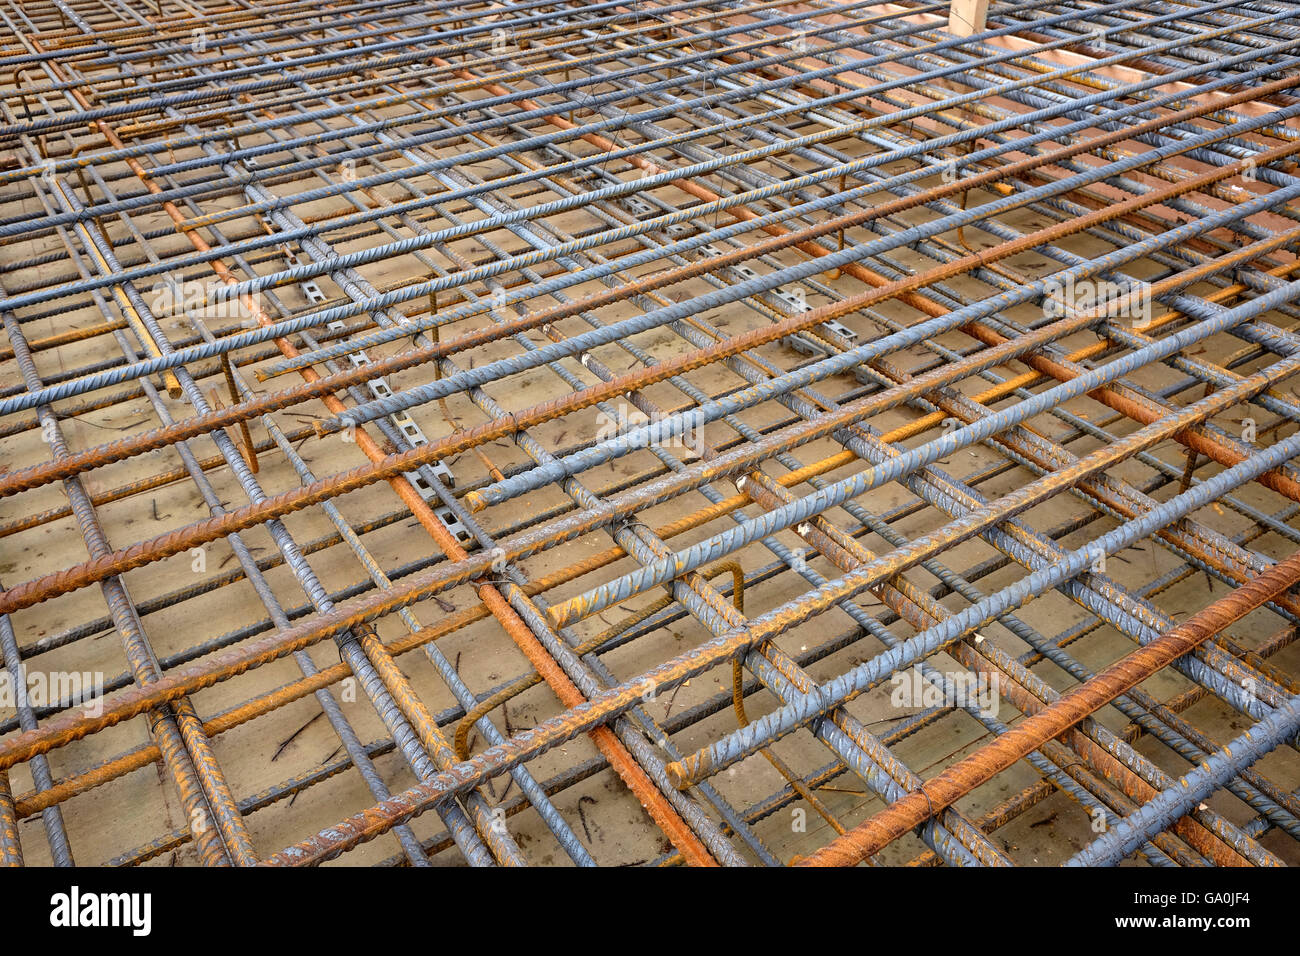 Construction steel reinforcing rods in a mesh before the concrete is ...